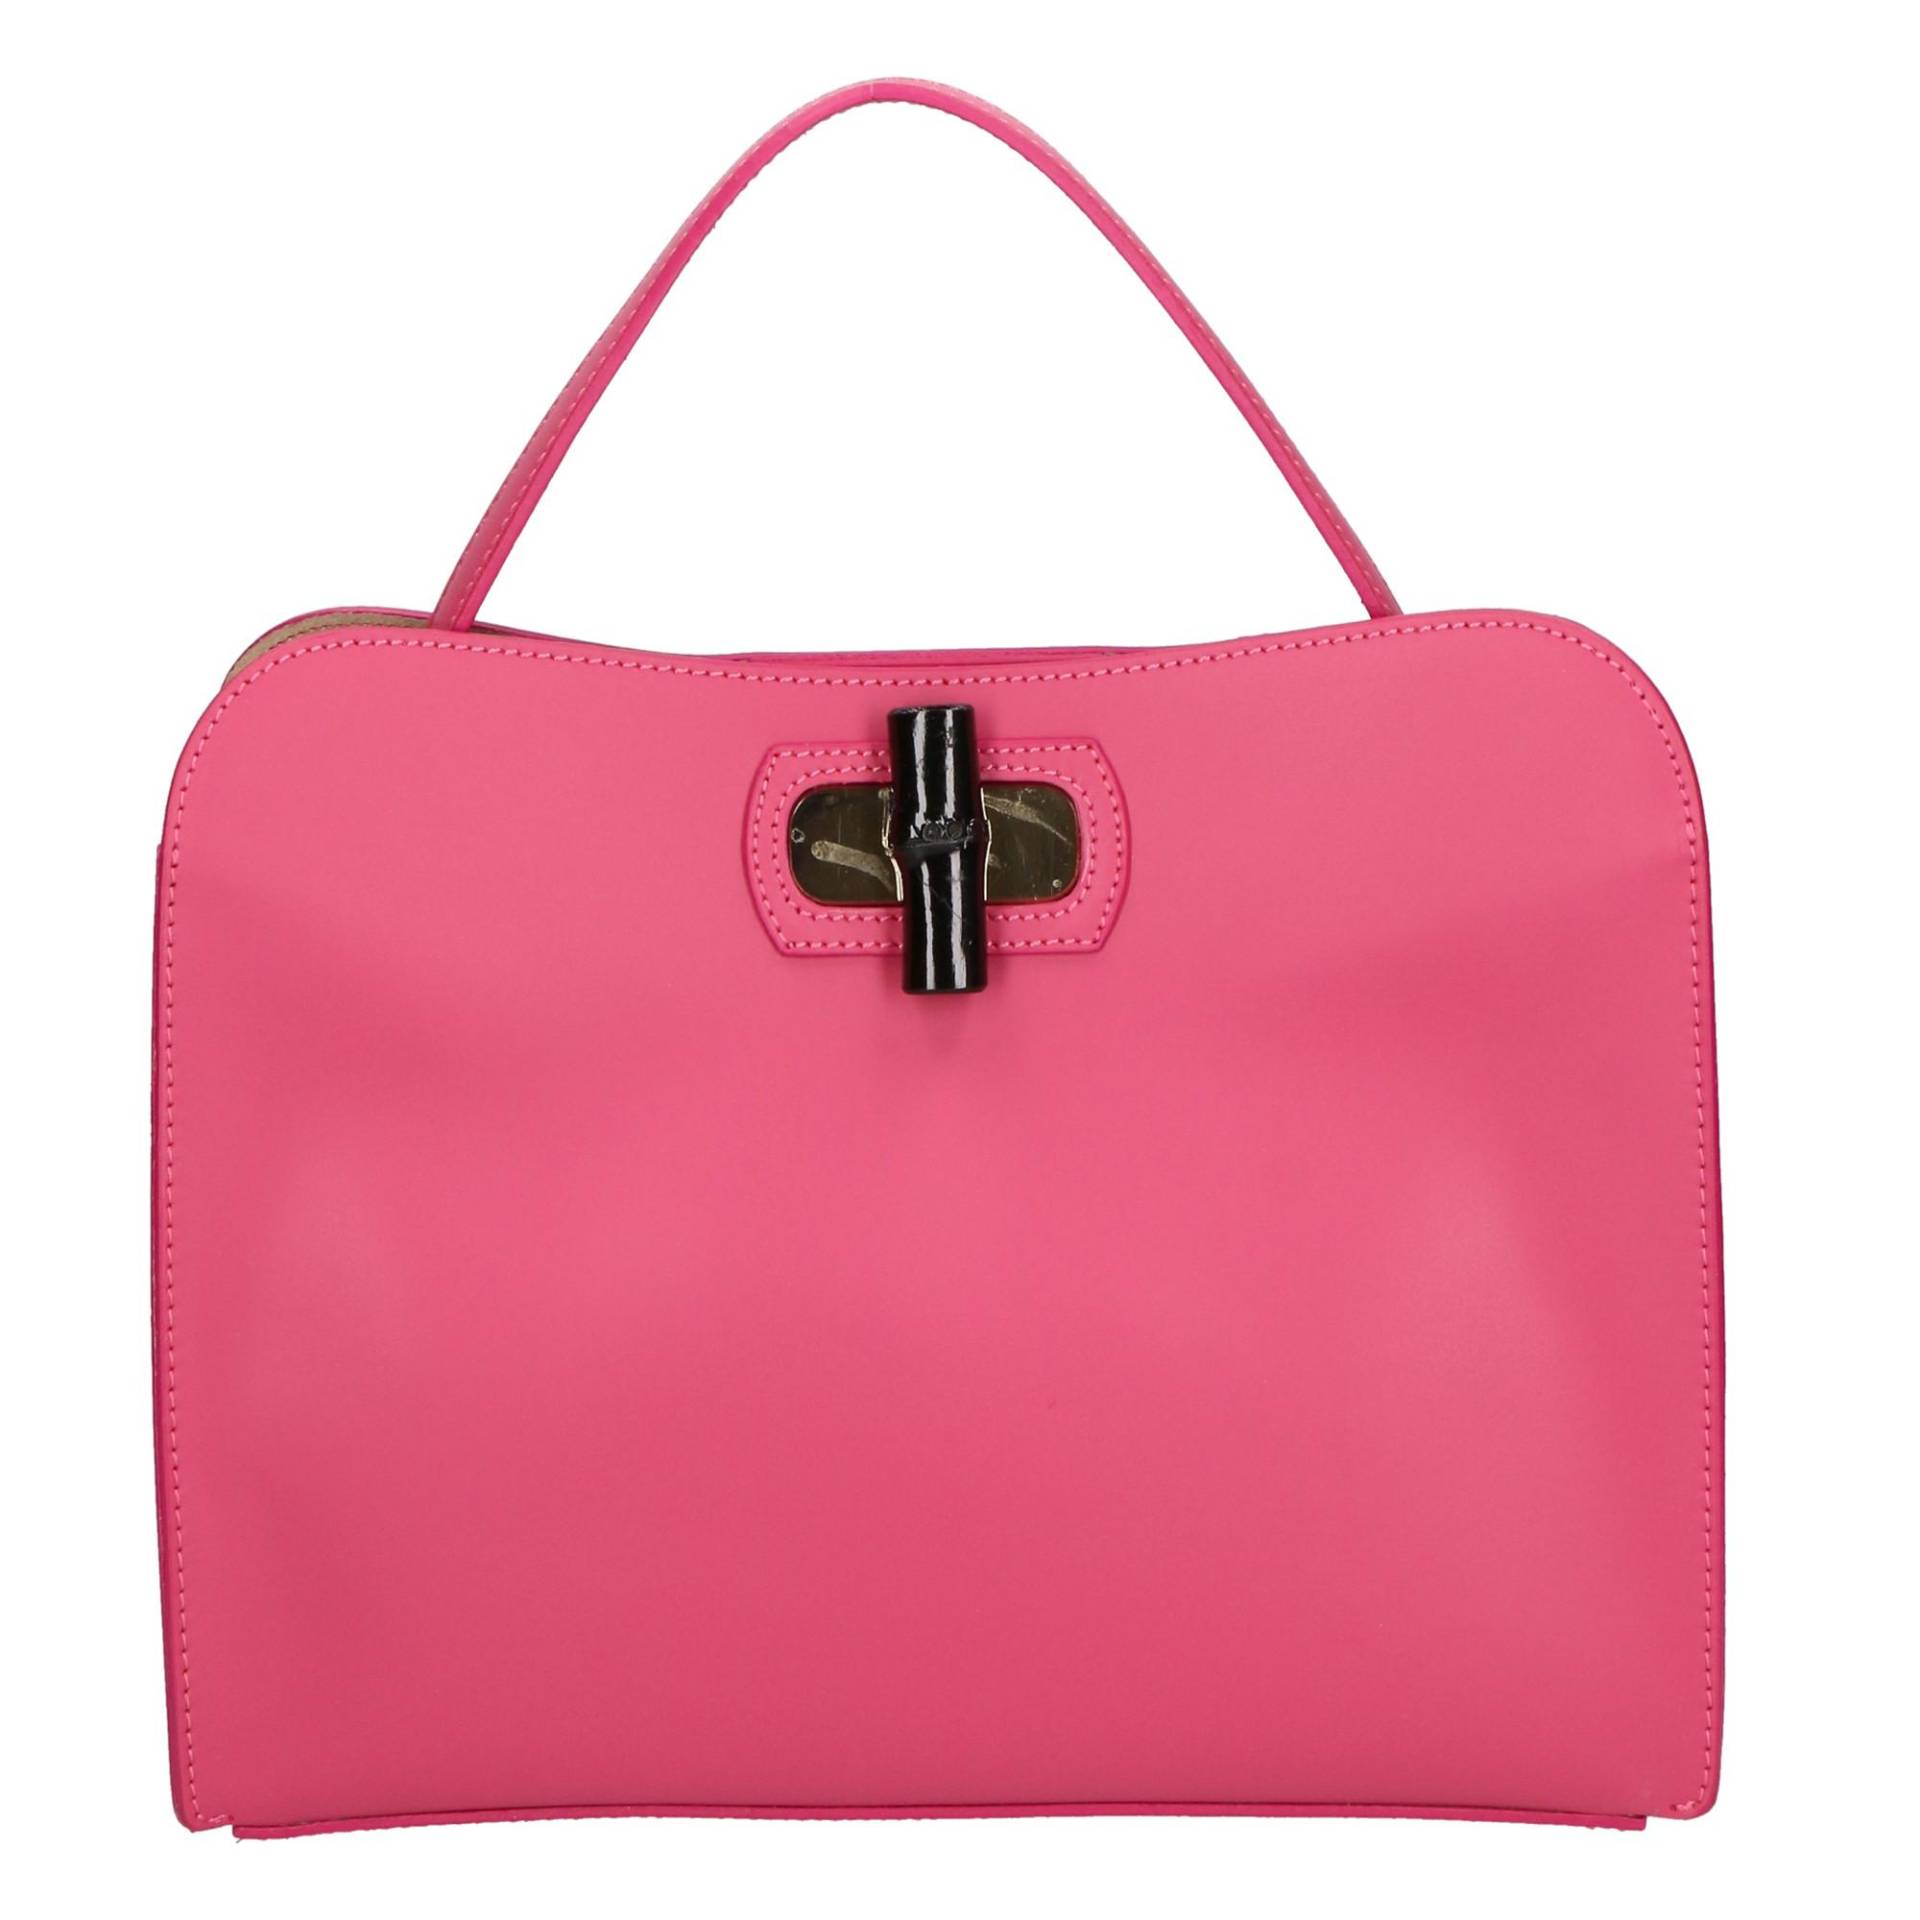 Handtasche Women's Single-compartment Handbag In Wrinkled Leather, With Removable Shoulder Strap. Italian Handcrafted Product. Damen Fuchsia ONE SIZE von Gave Lux